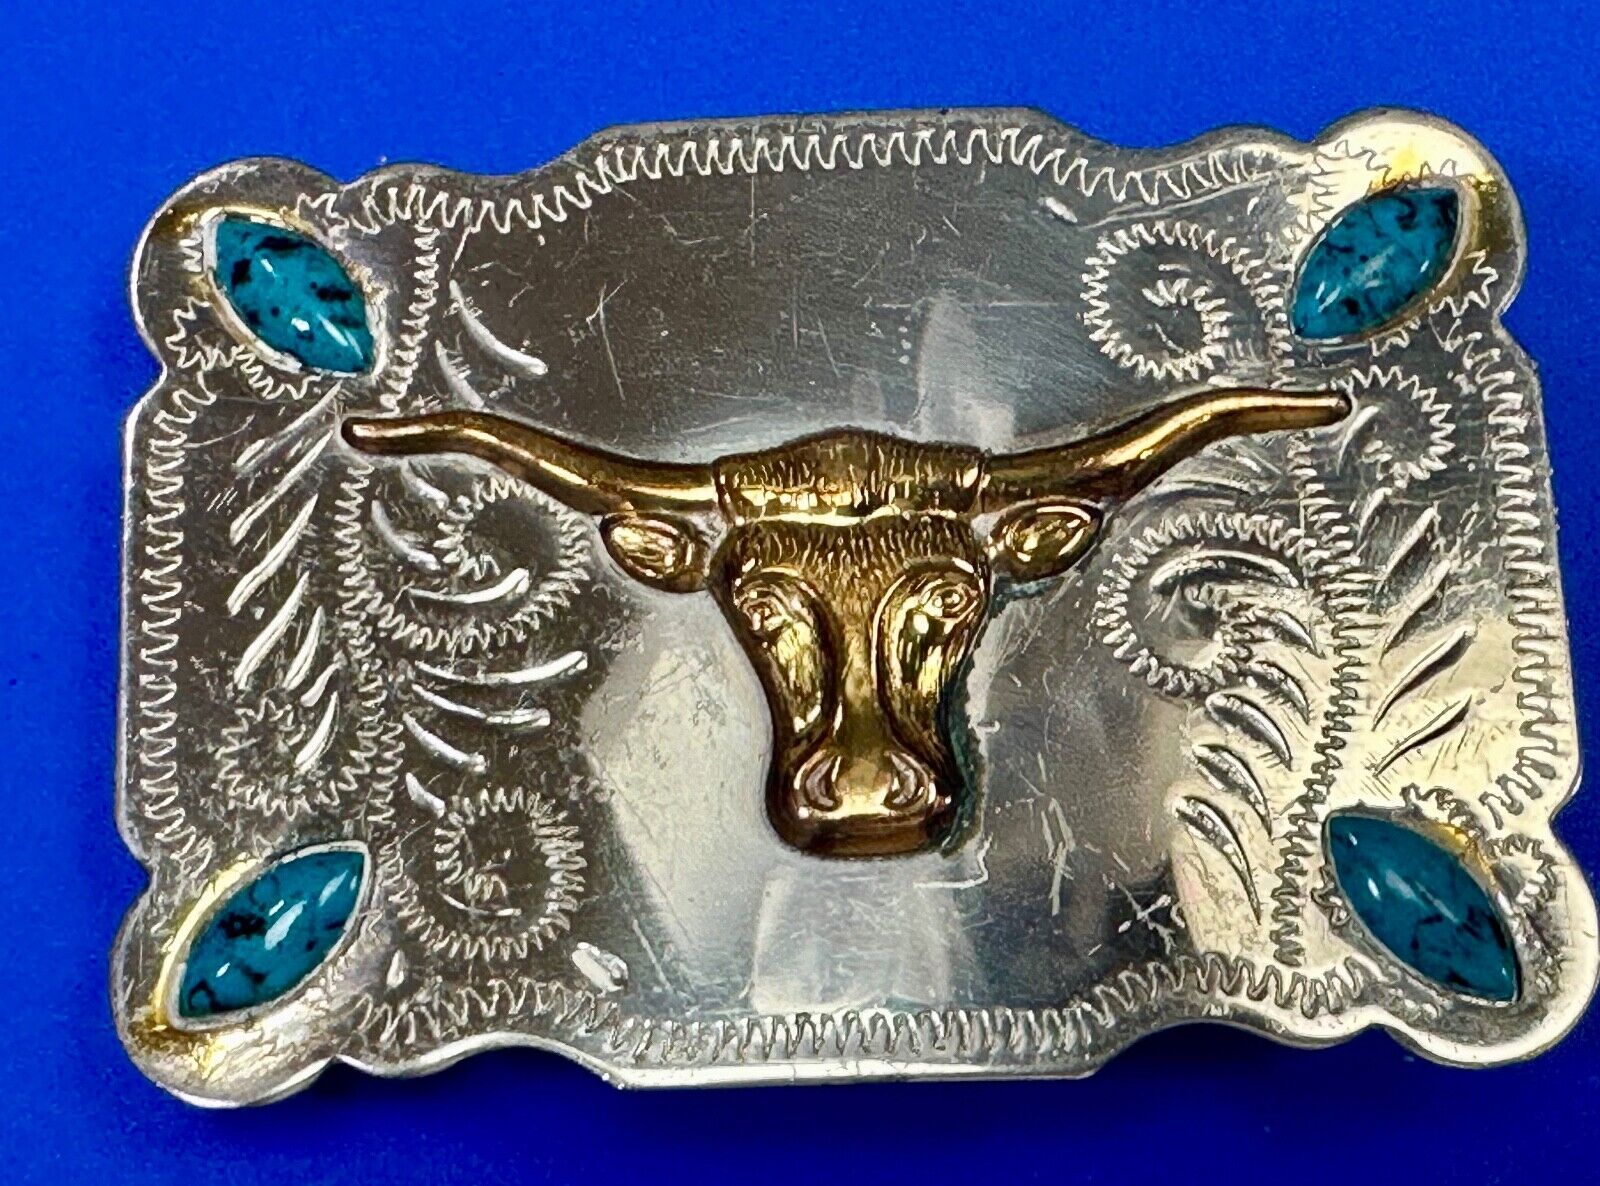 The Longhorn cow steer western nickel silver belt buckle with turquoise accents